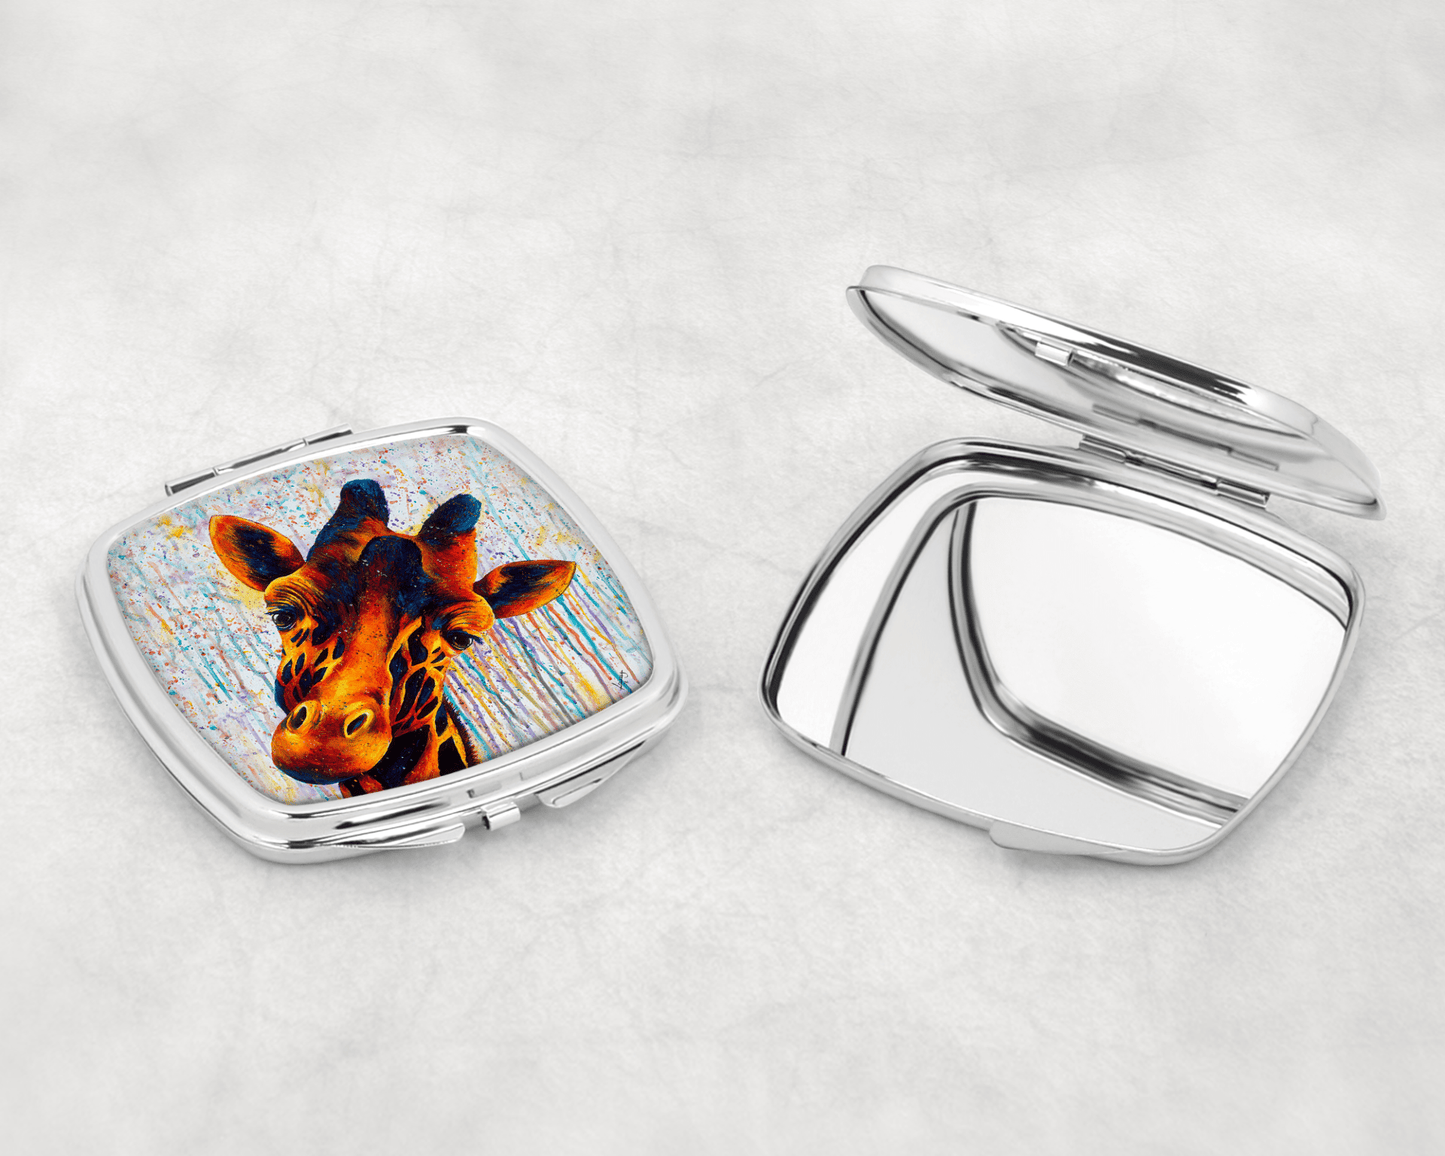 Curved square compact mirrors - artcoasterprinting